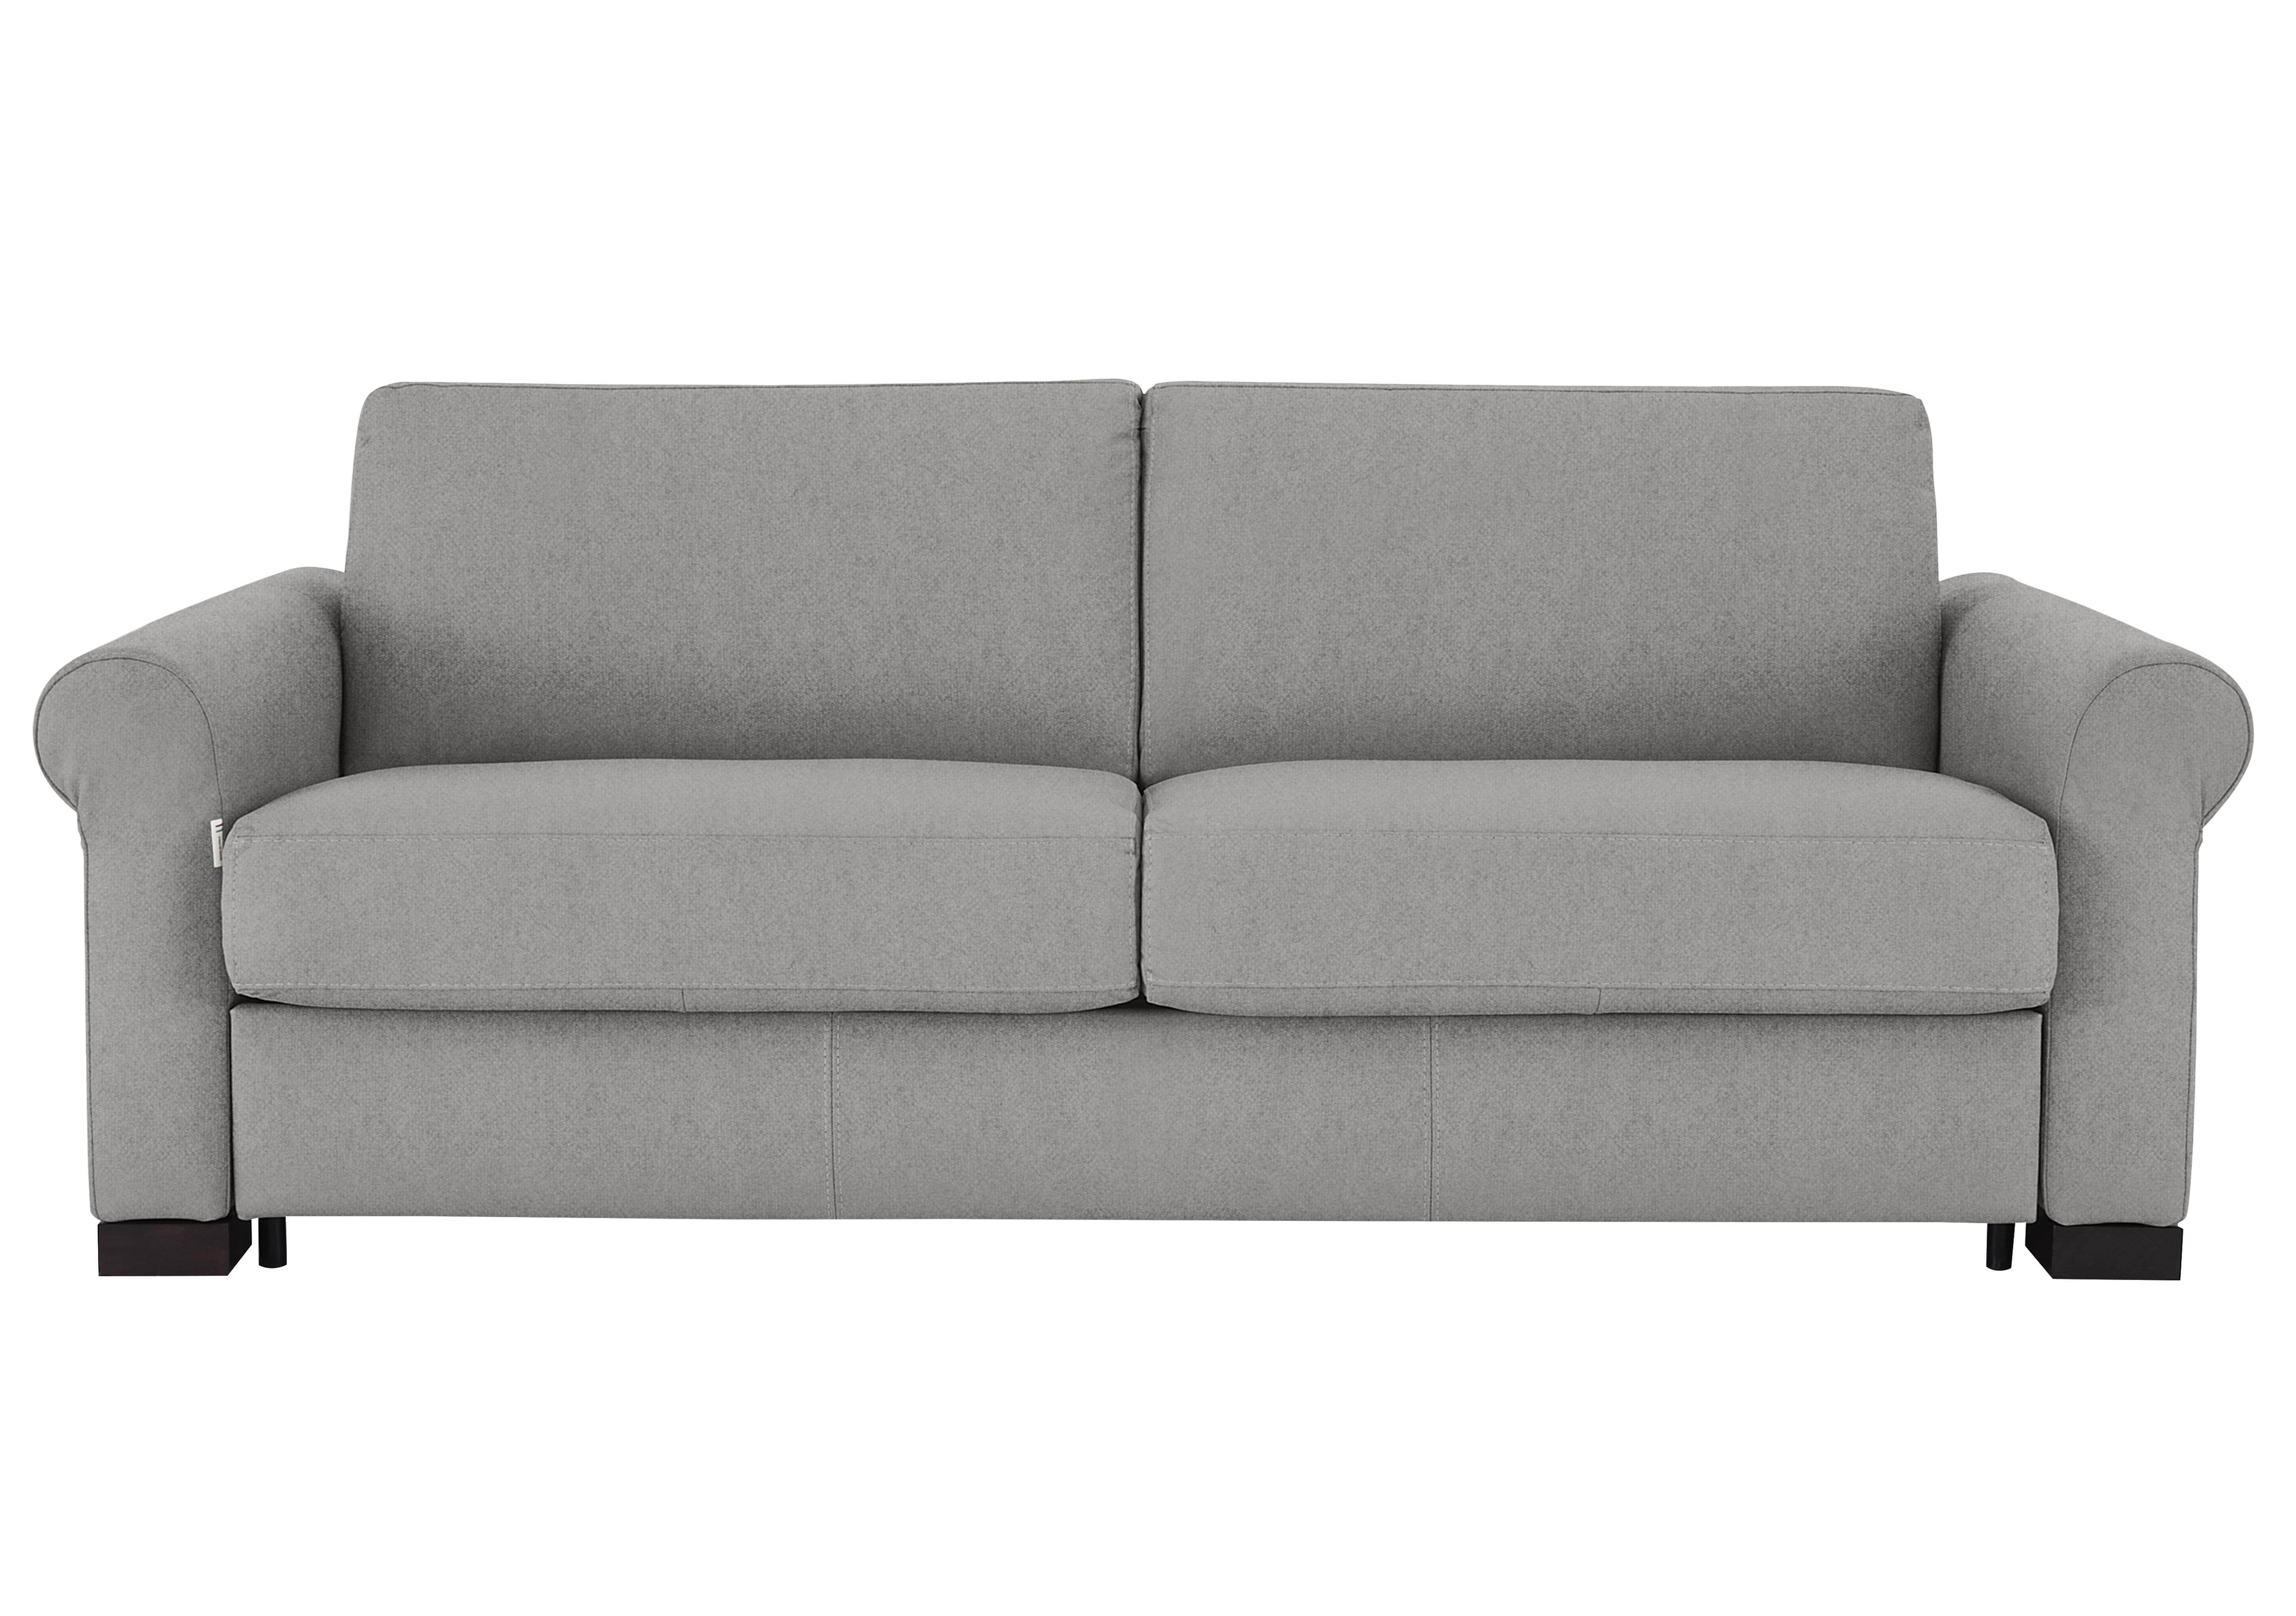 Alcova 3 Seater Fabric Sofa Bed with Scroll Arms in Fuente Ash on Furniture Village